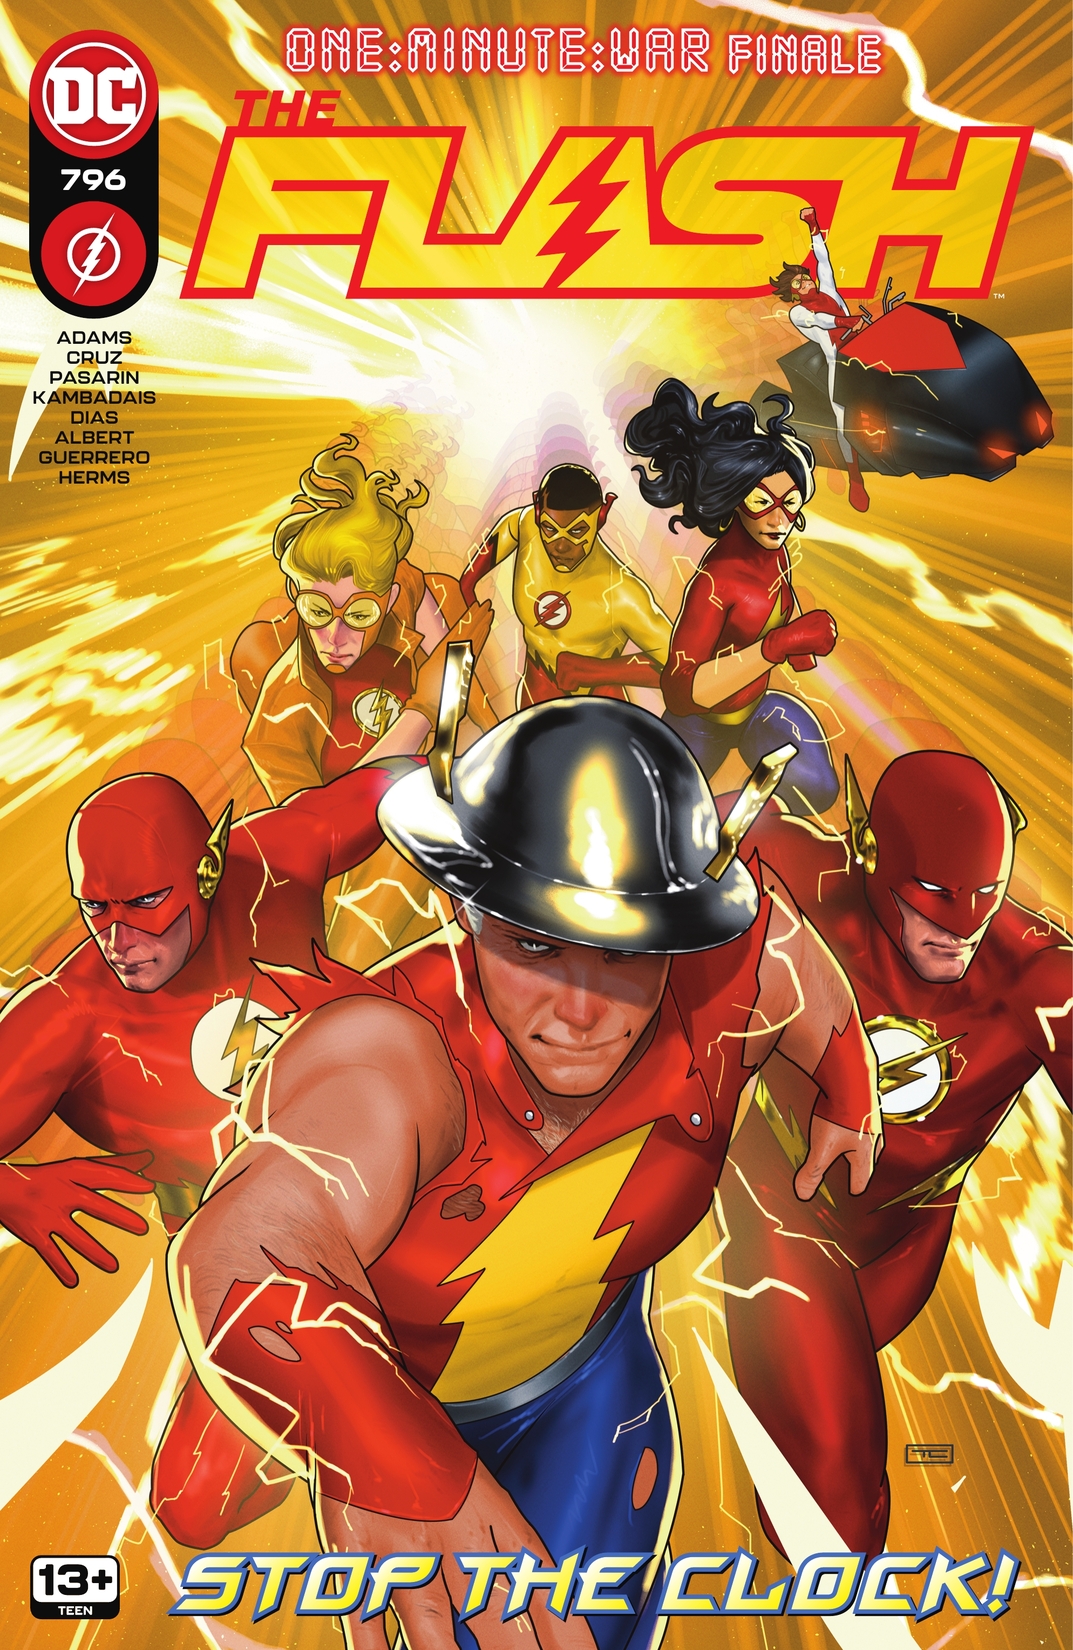 The Flash (2016-) #796 preview images